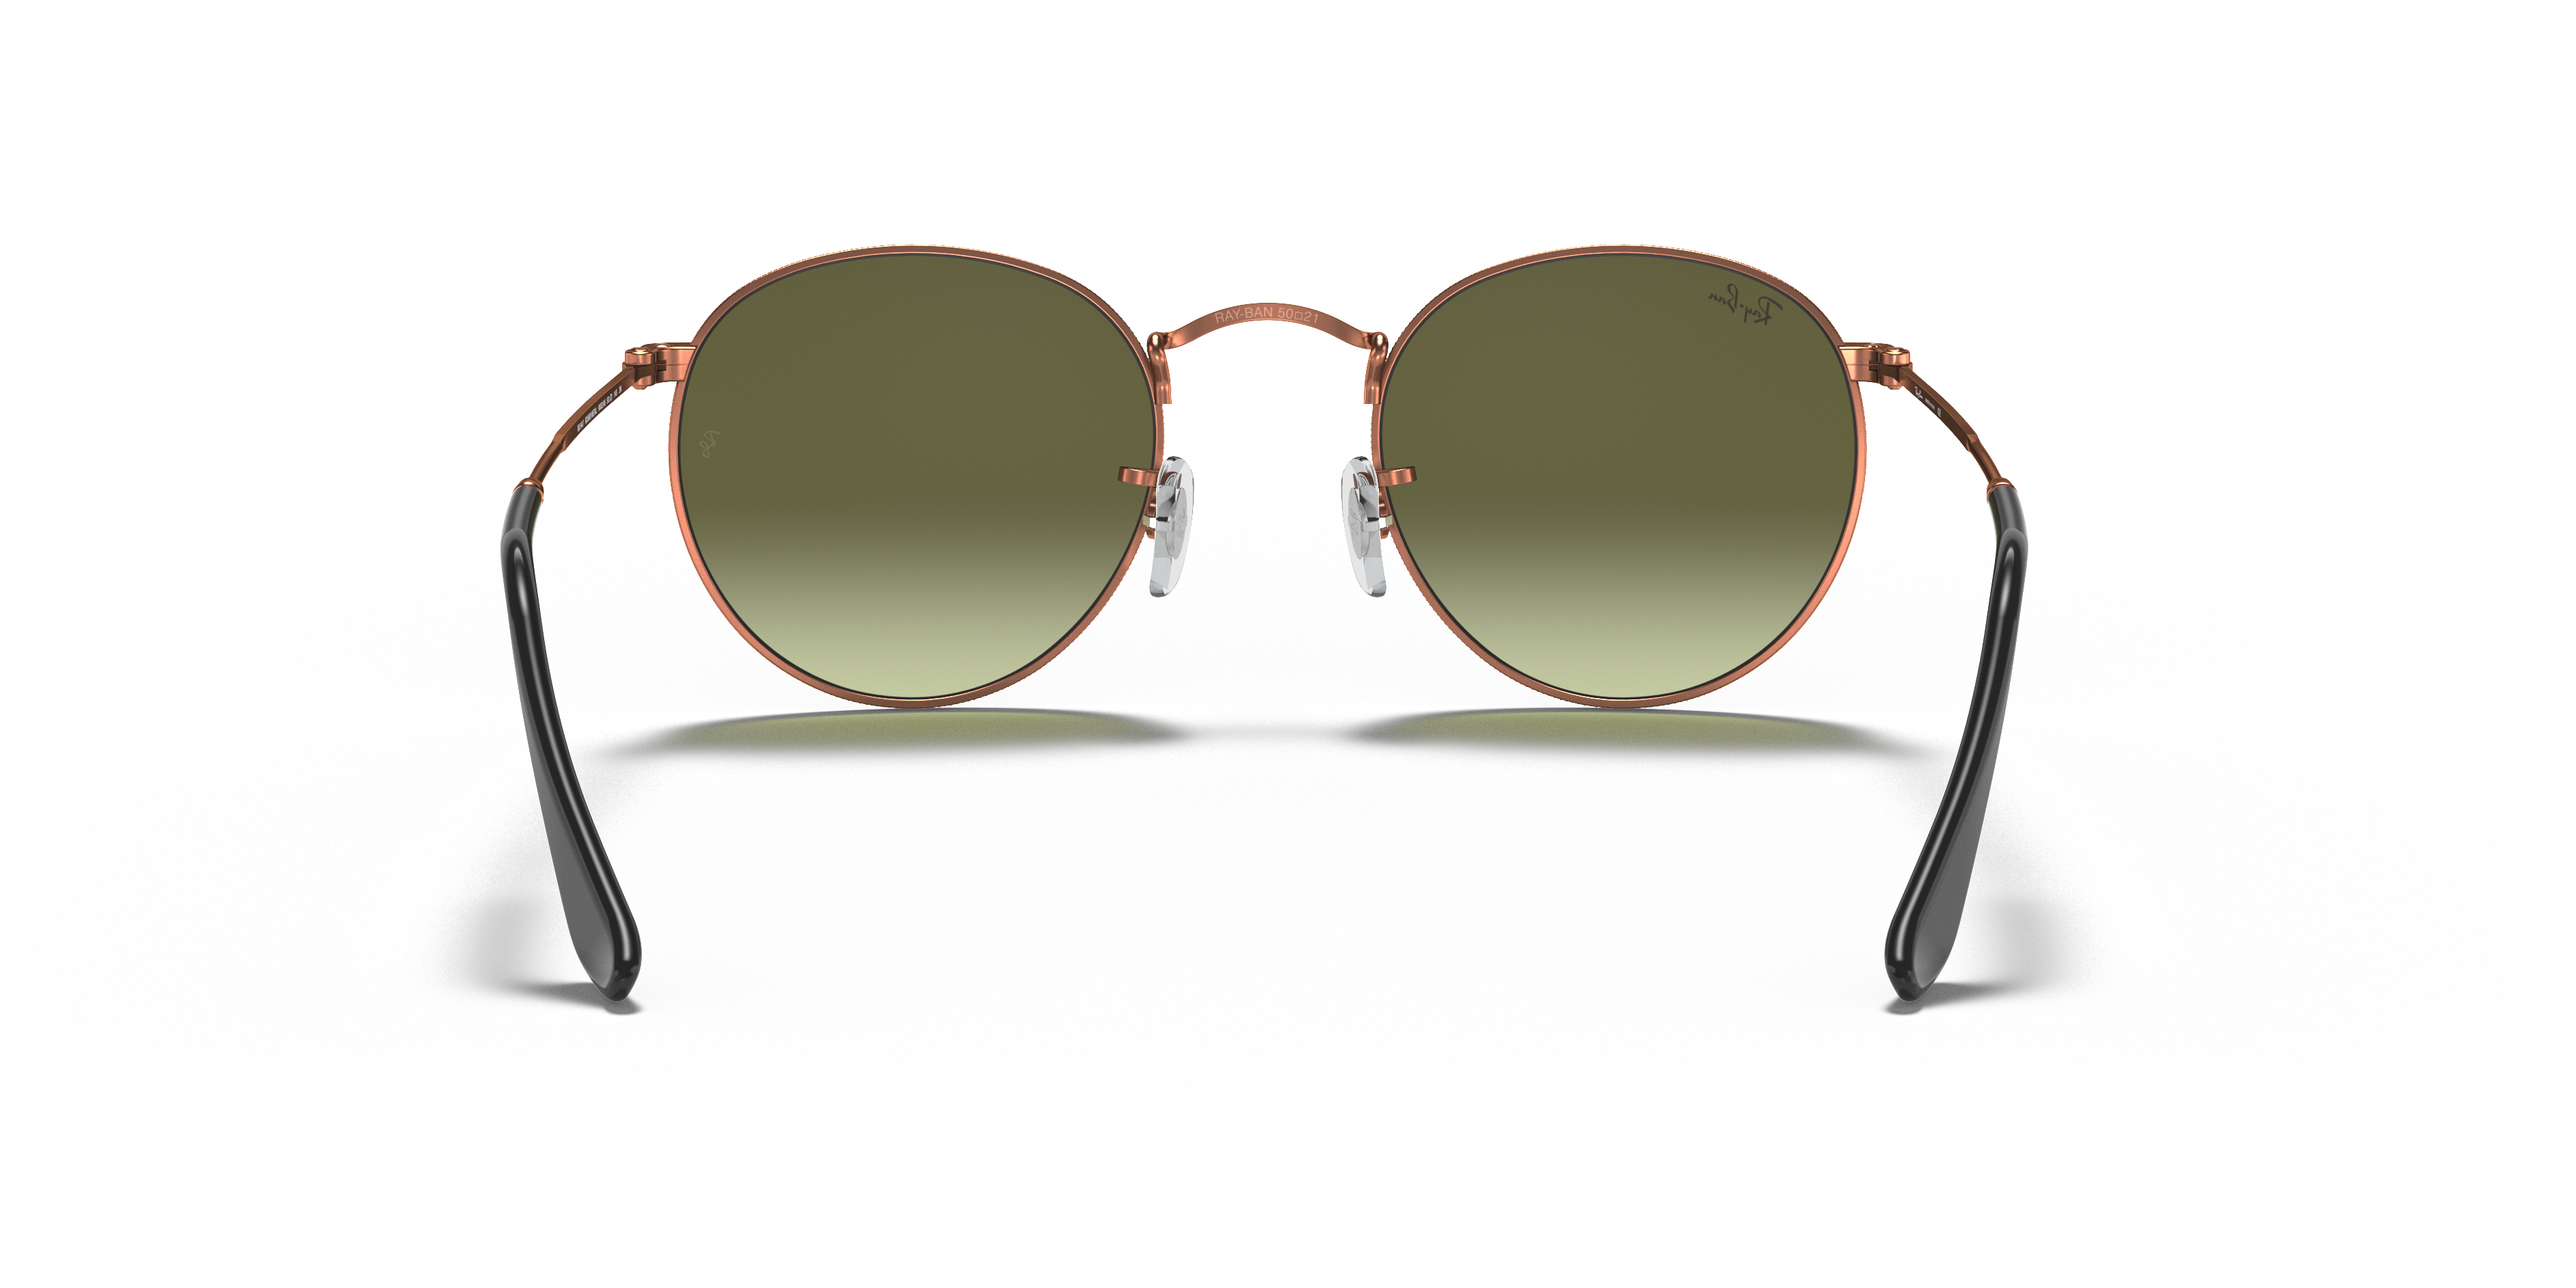 Ray Ban Rb3447 50 Round Metal Sunglasses Lenscrafters